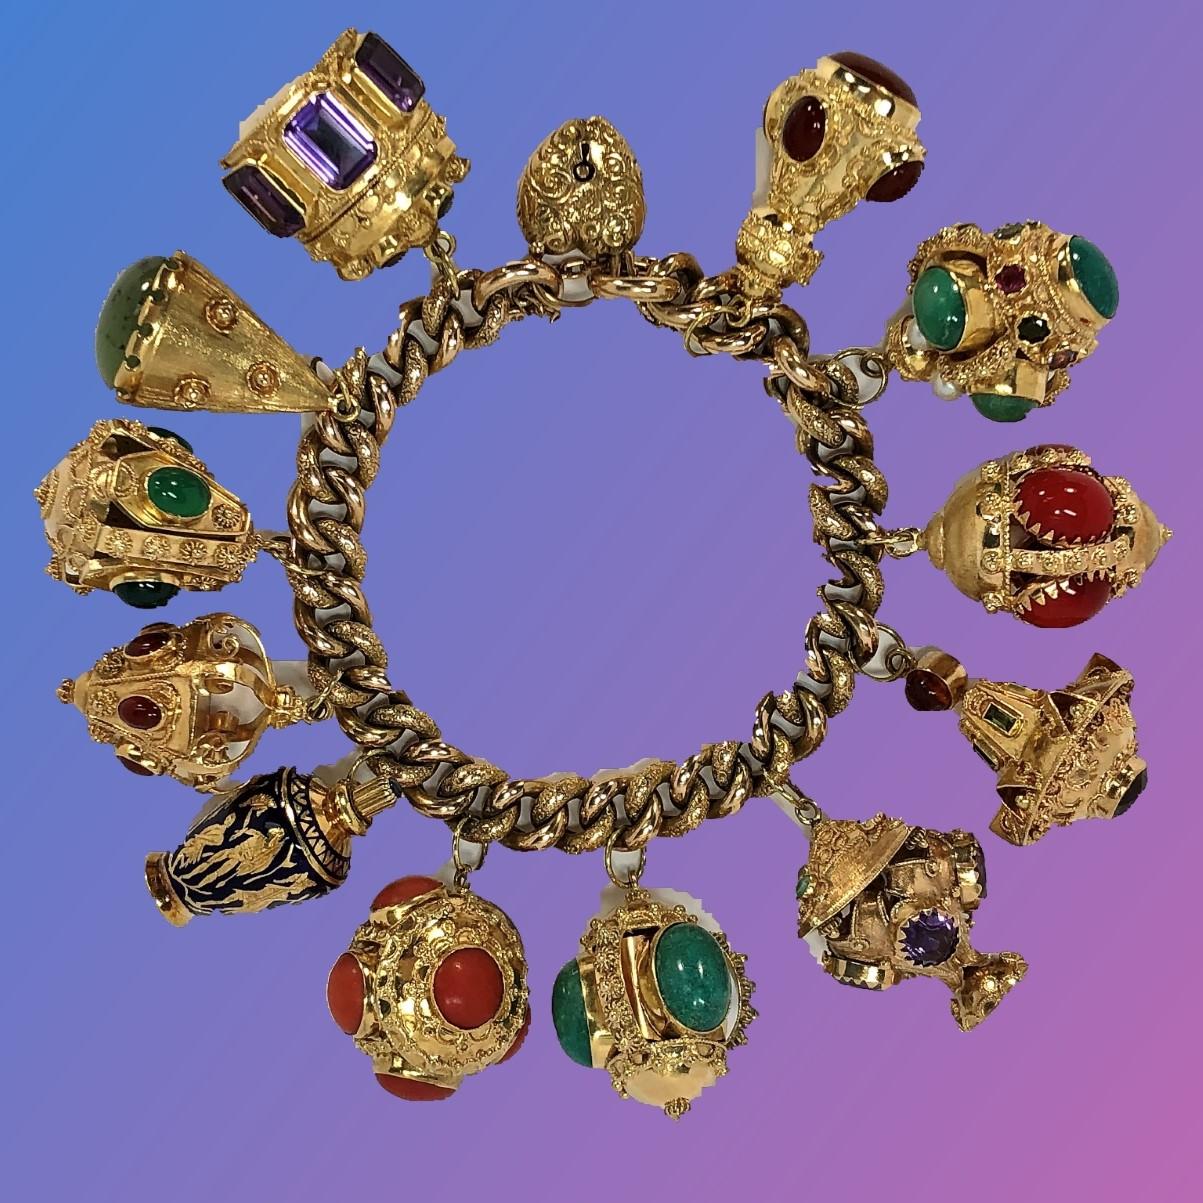 A beautiful vintage 18K Yellow Gold bracelet with both smooth and textured 11/32 inch wide links sporting 12 beautiful, Italian gold Estruscan Revival charms. One of the charms is a blue enamel perfumier, and the other 11 charms are set with various